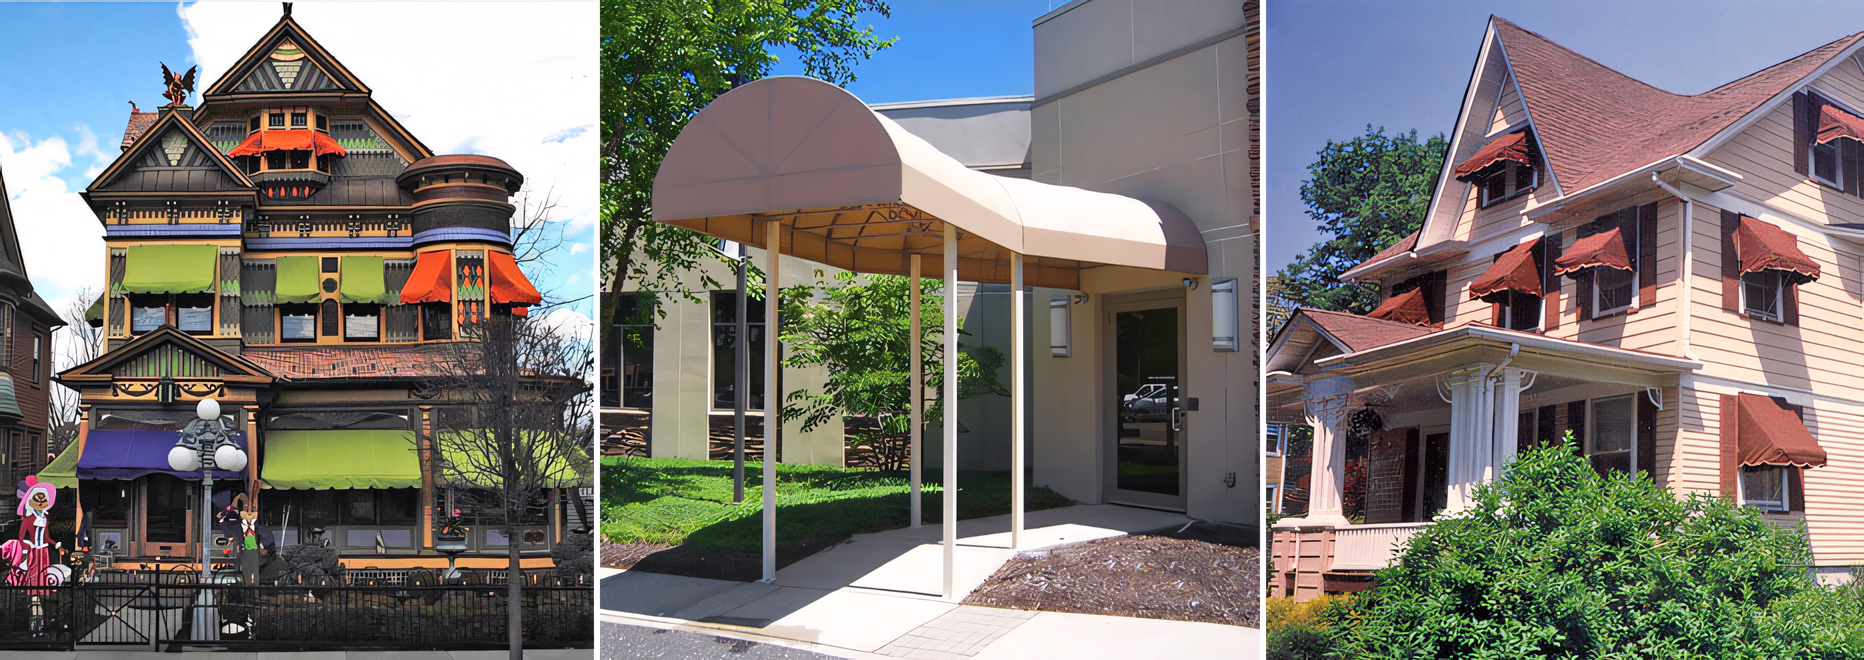 G.E. Marshall, Inc. | Central Jersey Awnings